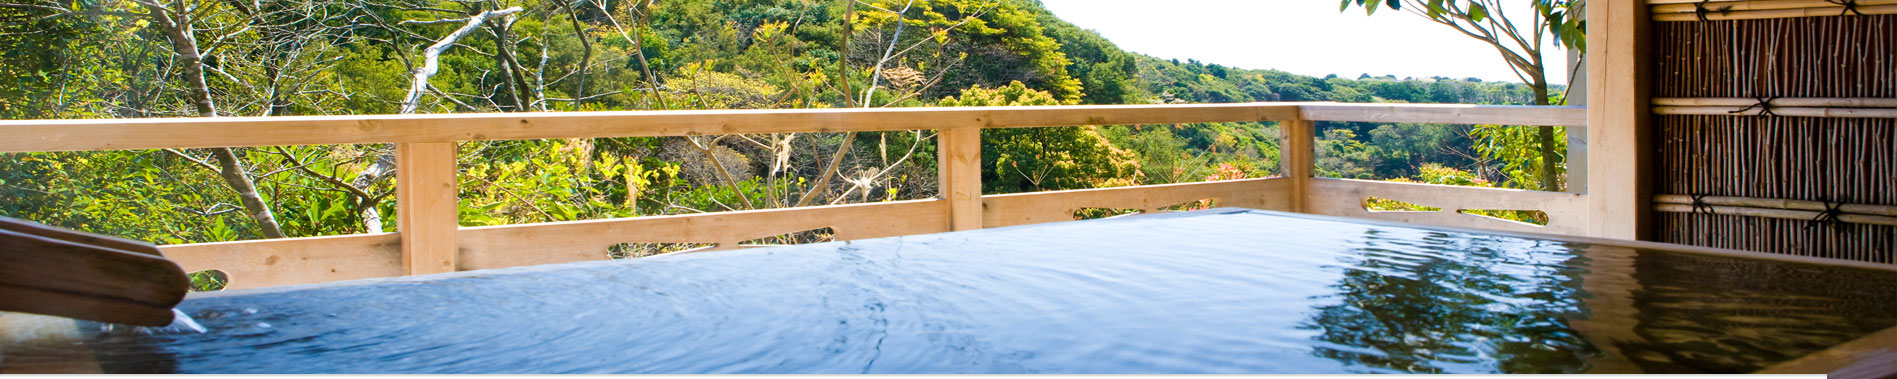 Recommended Onsen Hotels in Basque Coast